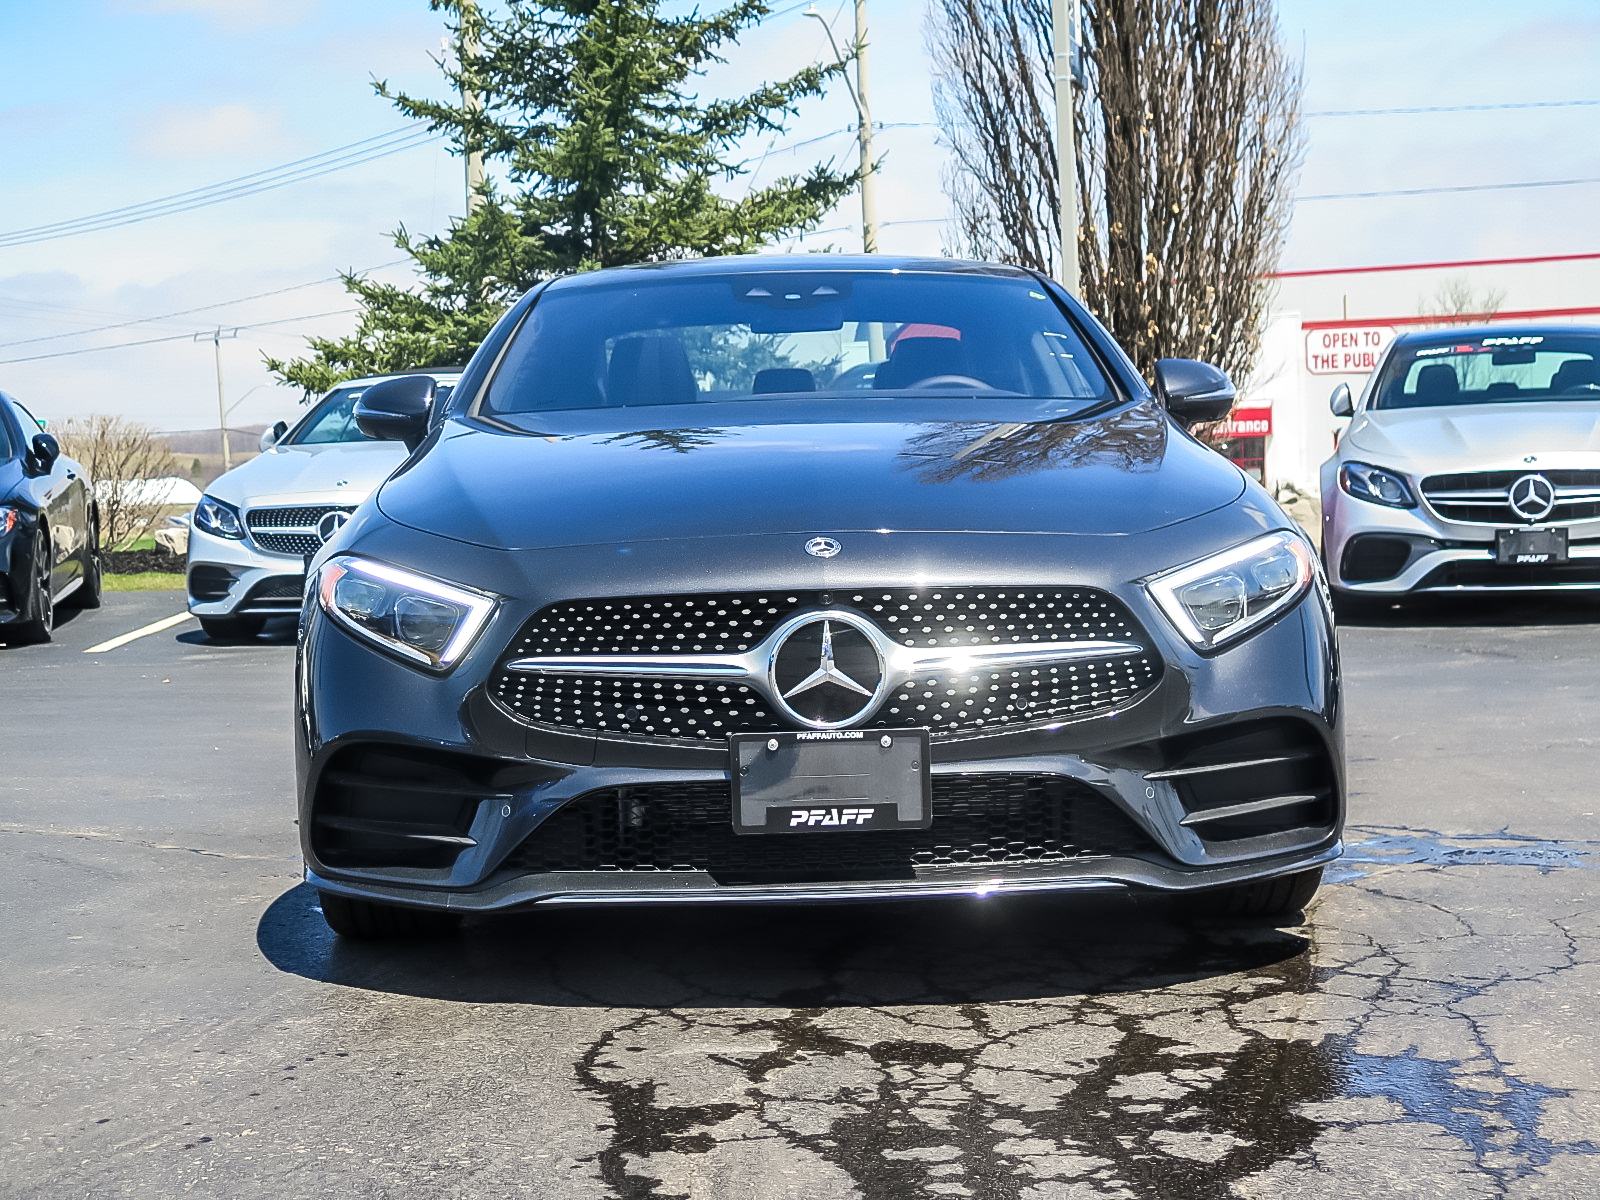 New 2019 MercedesBenz CLS450 4MATIC Coupe 4Door Coupe in Kitchener